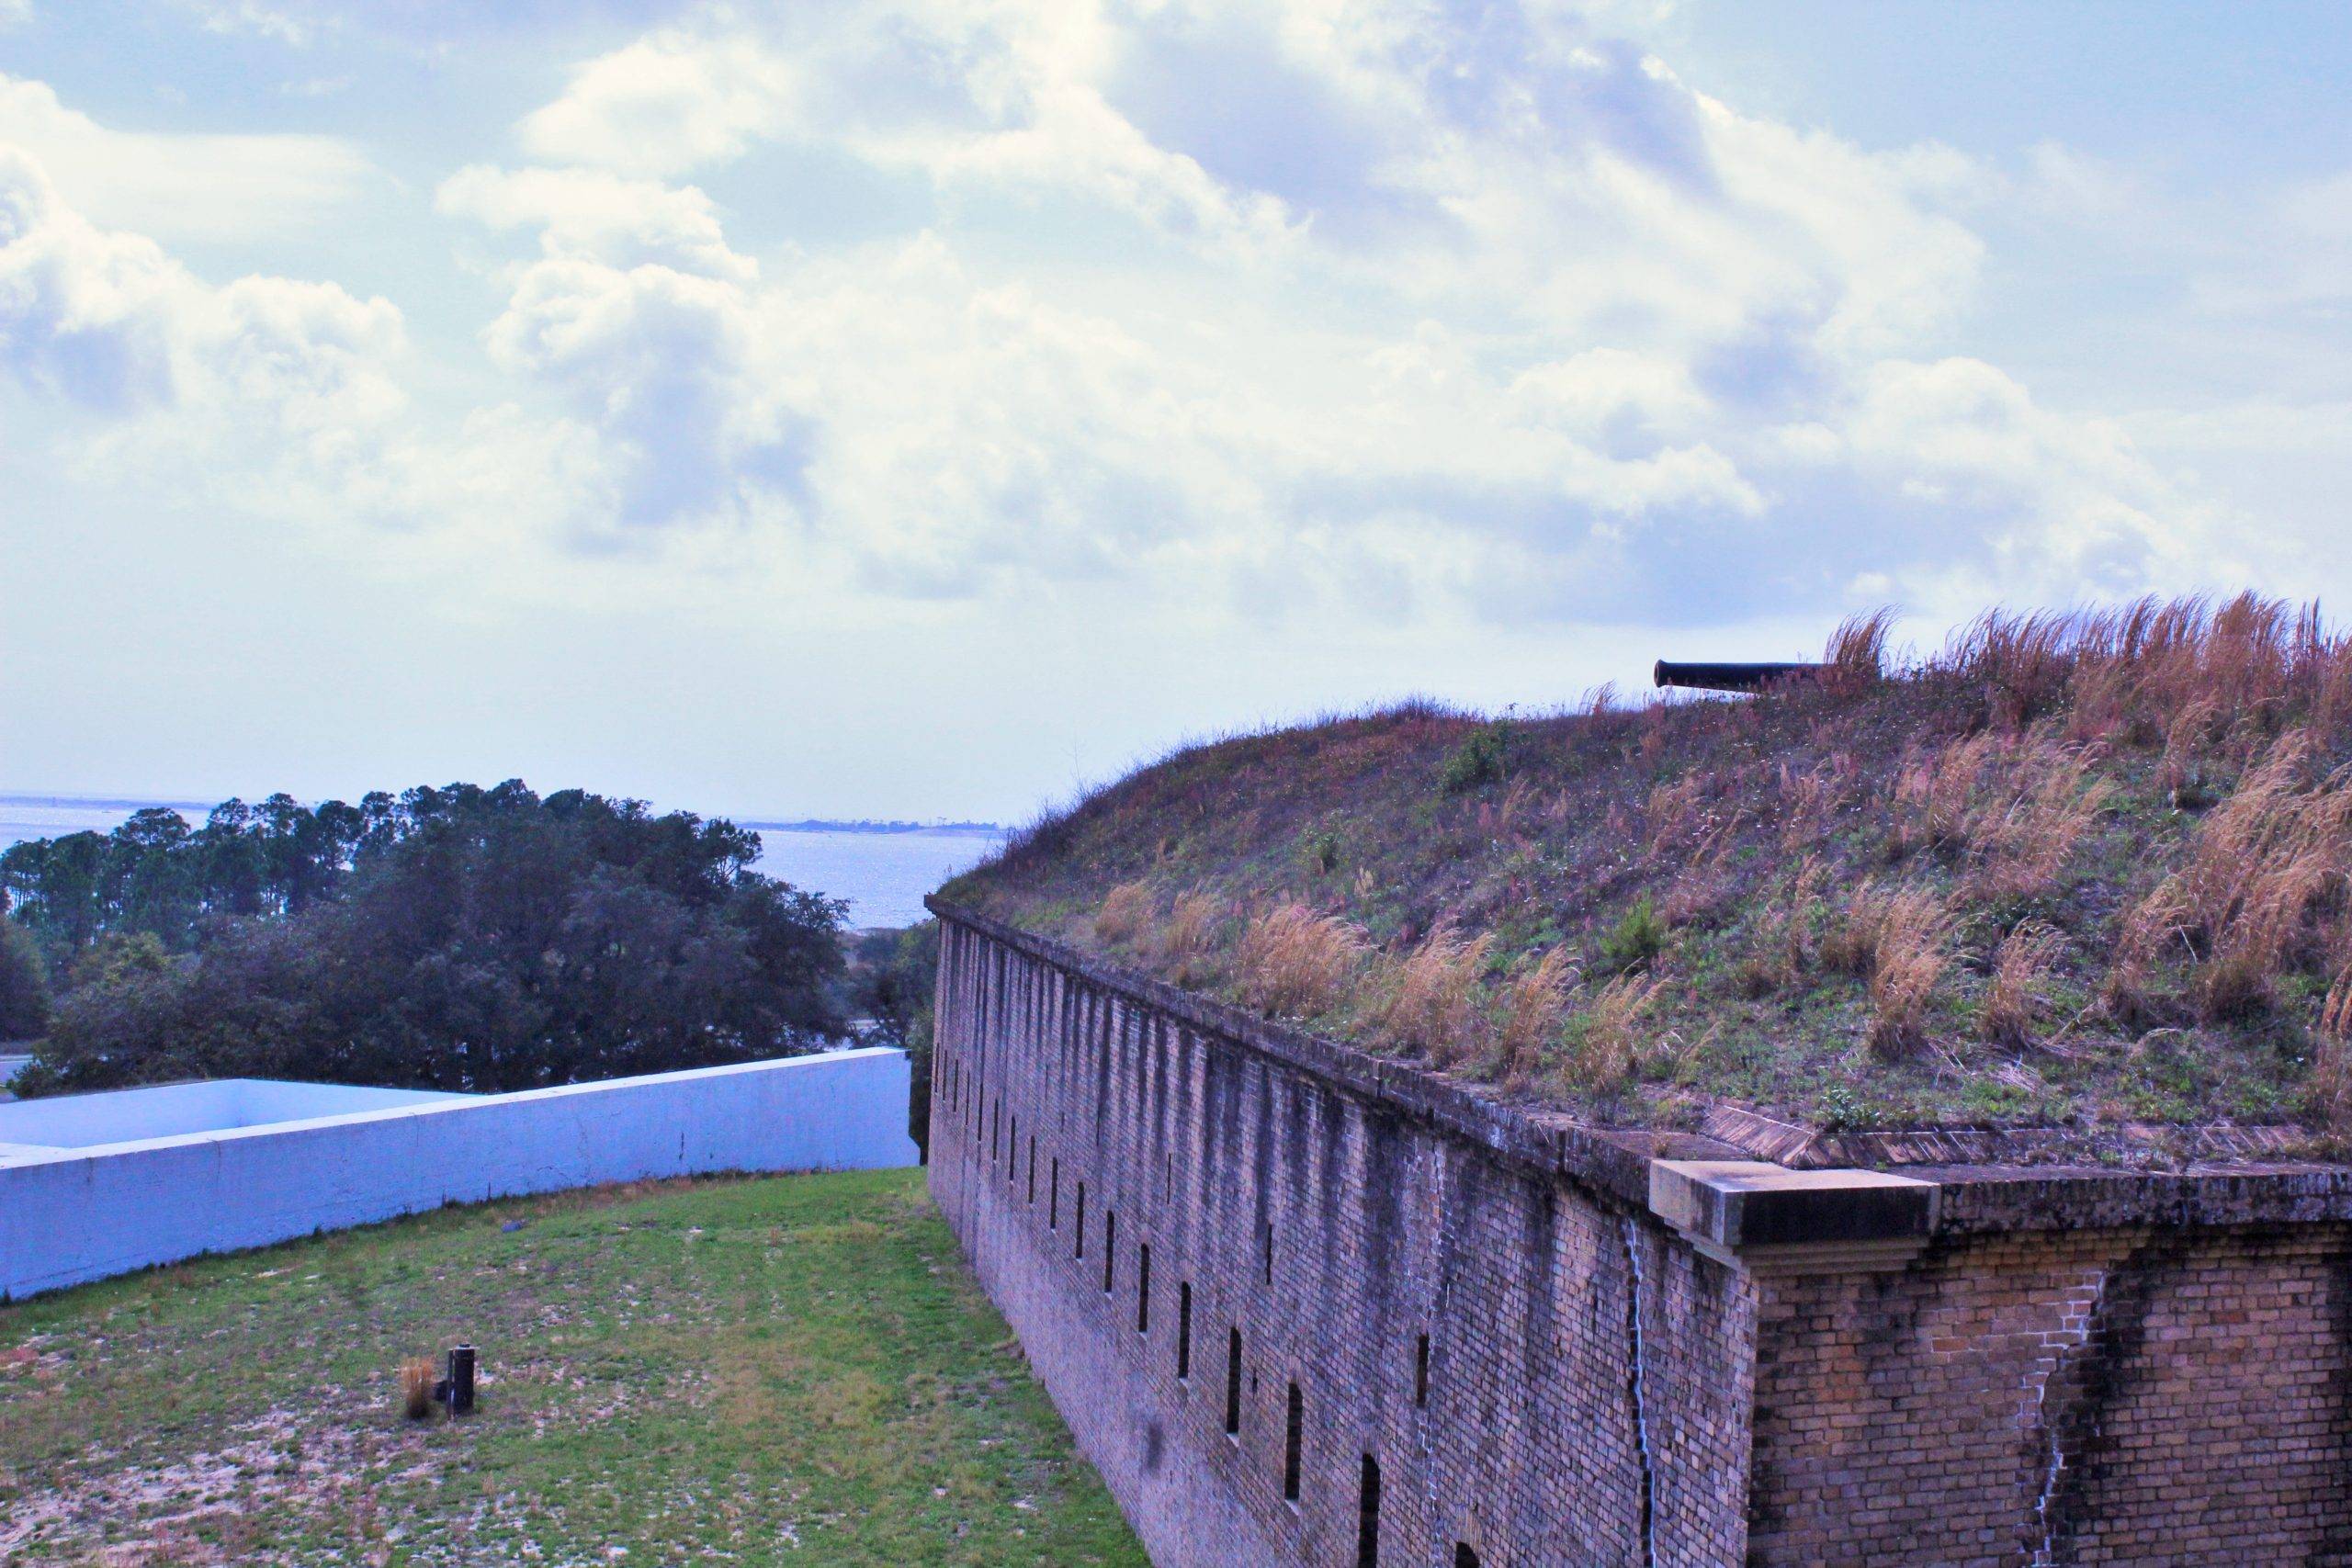 Hilltop view of Fort Barrancas and the Pensacola Bay